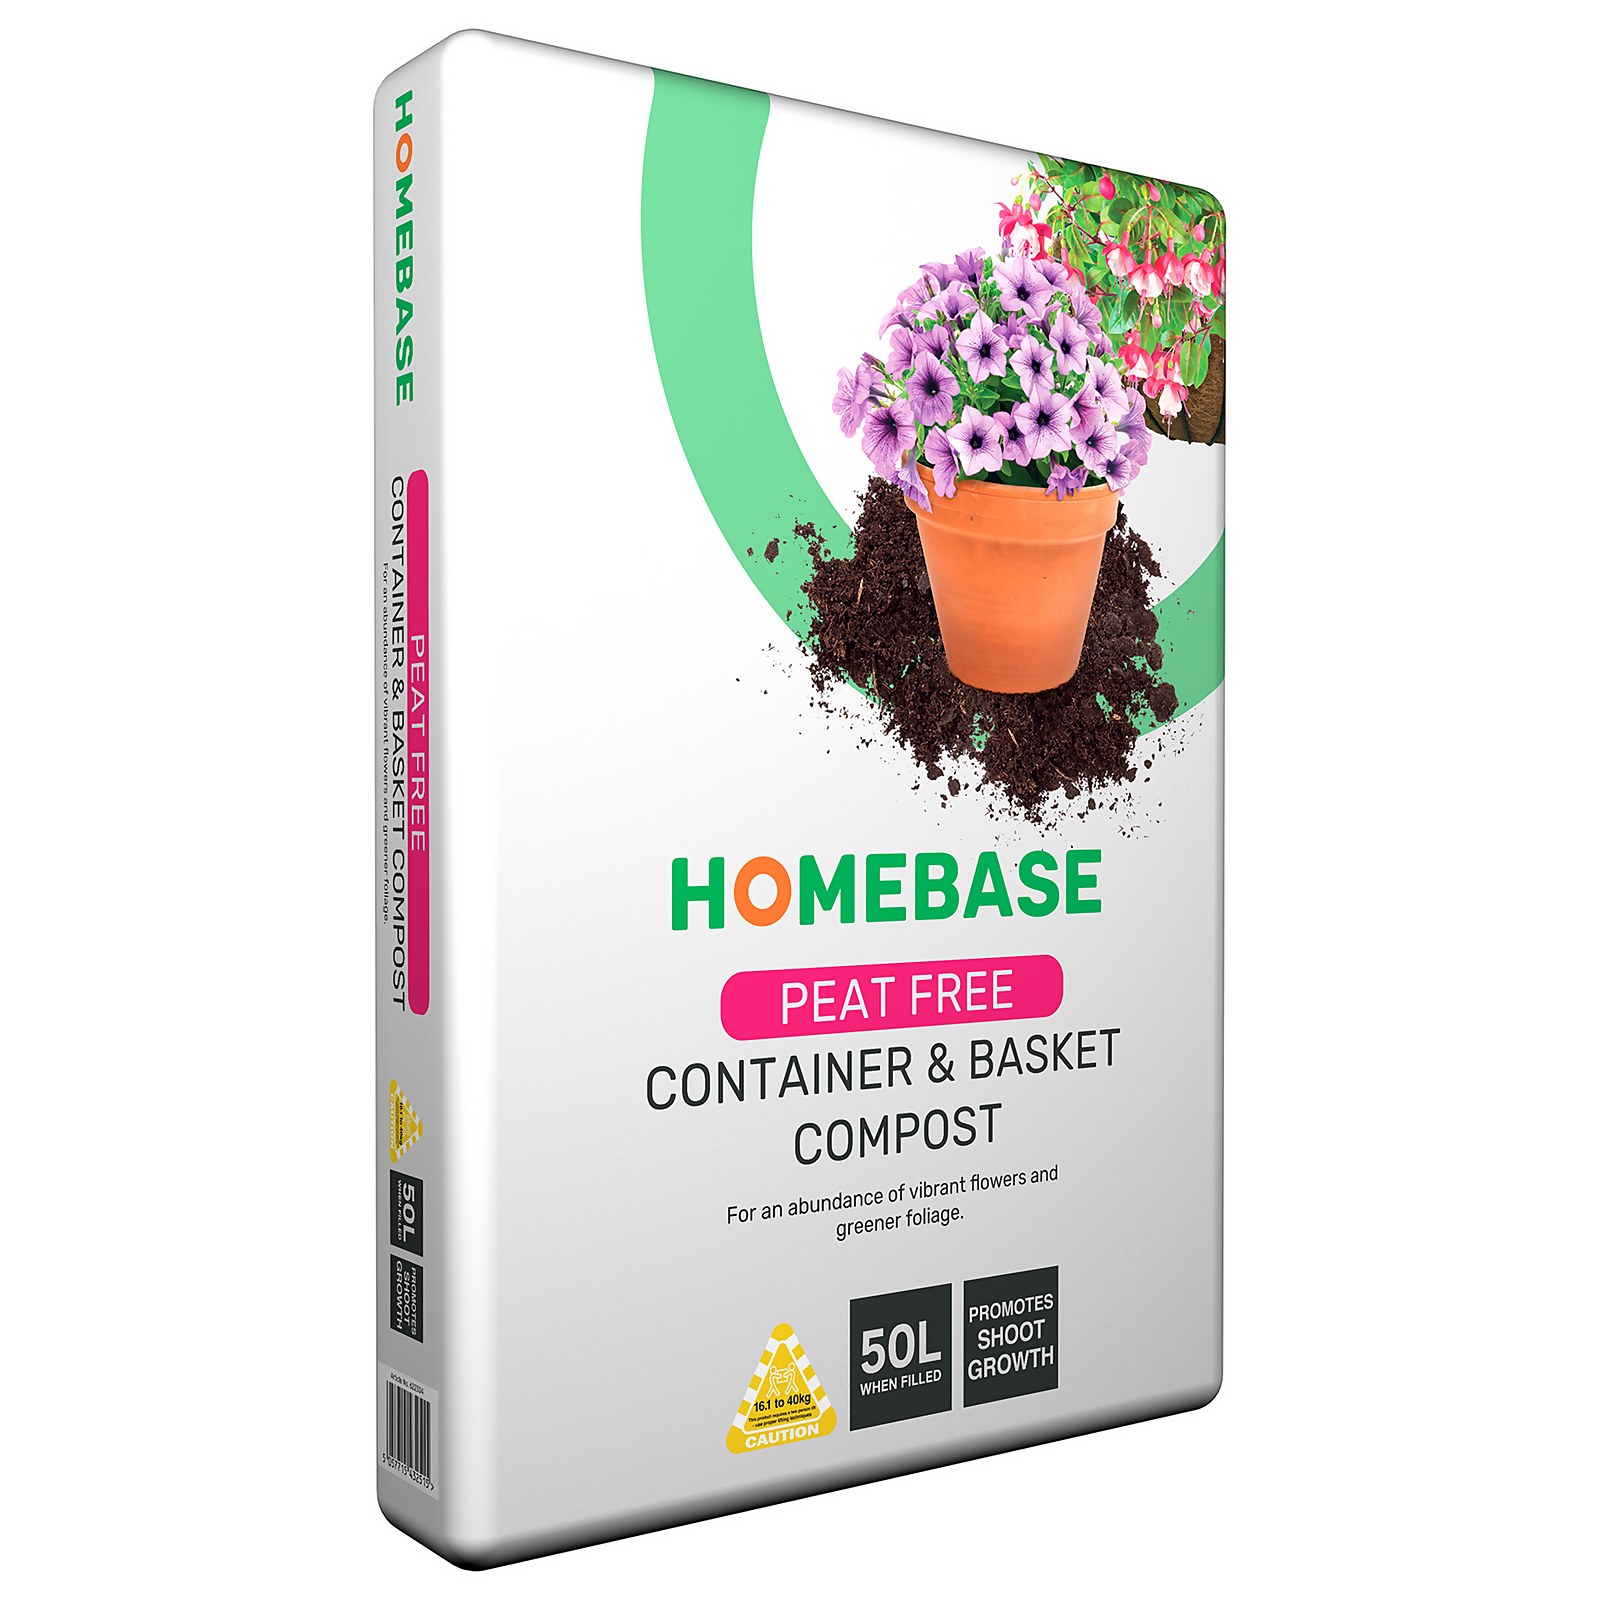 Photo of Homebase Peat Free Container & Basket Compost - 50l